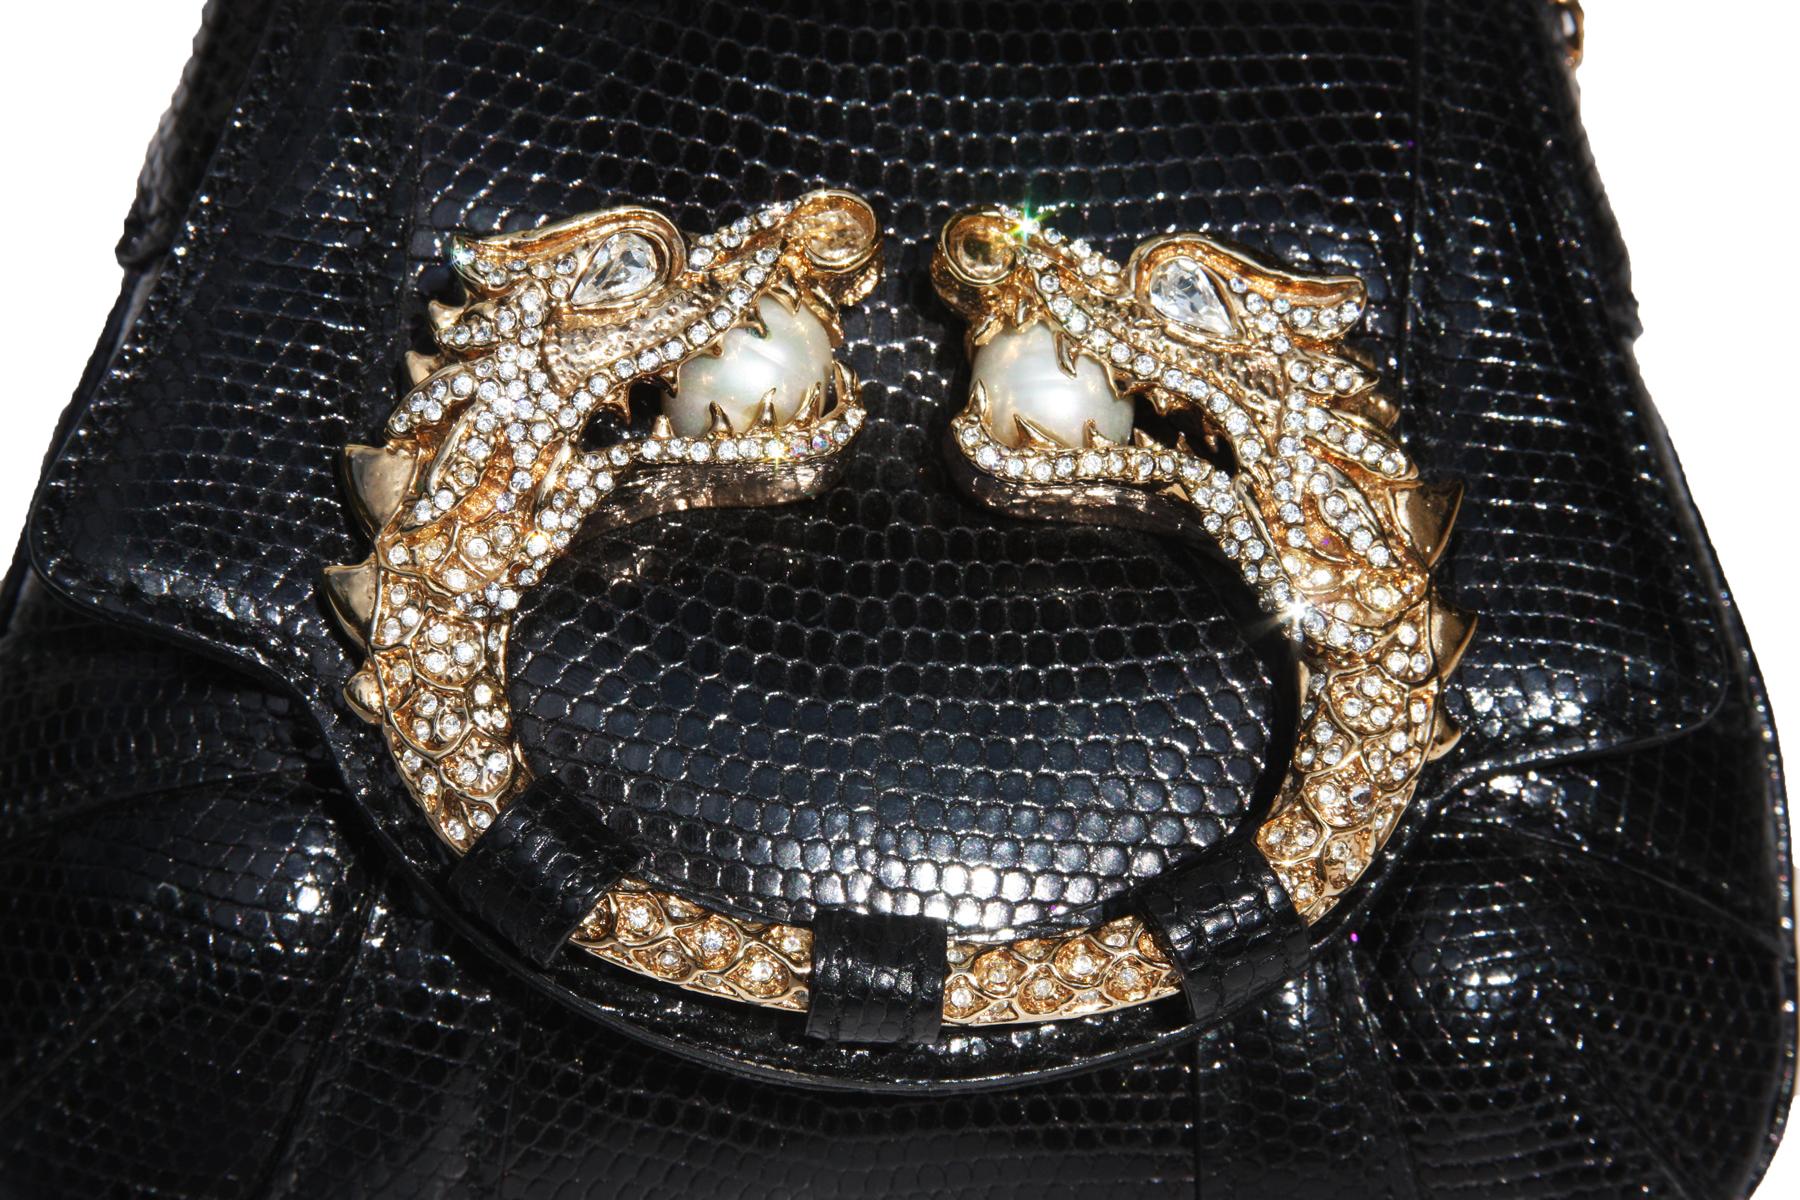 Tom Ford for Gucci F/W 2004 Lizard Evening Clutch Bag Jeweled Dragon  In Excellent Condition For Sale In Montgomery, TX